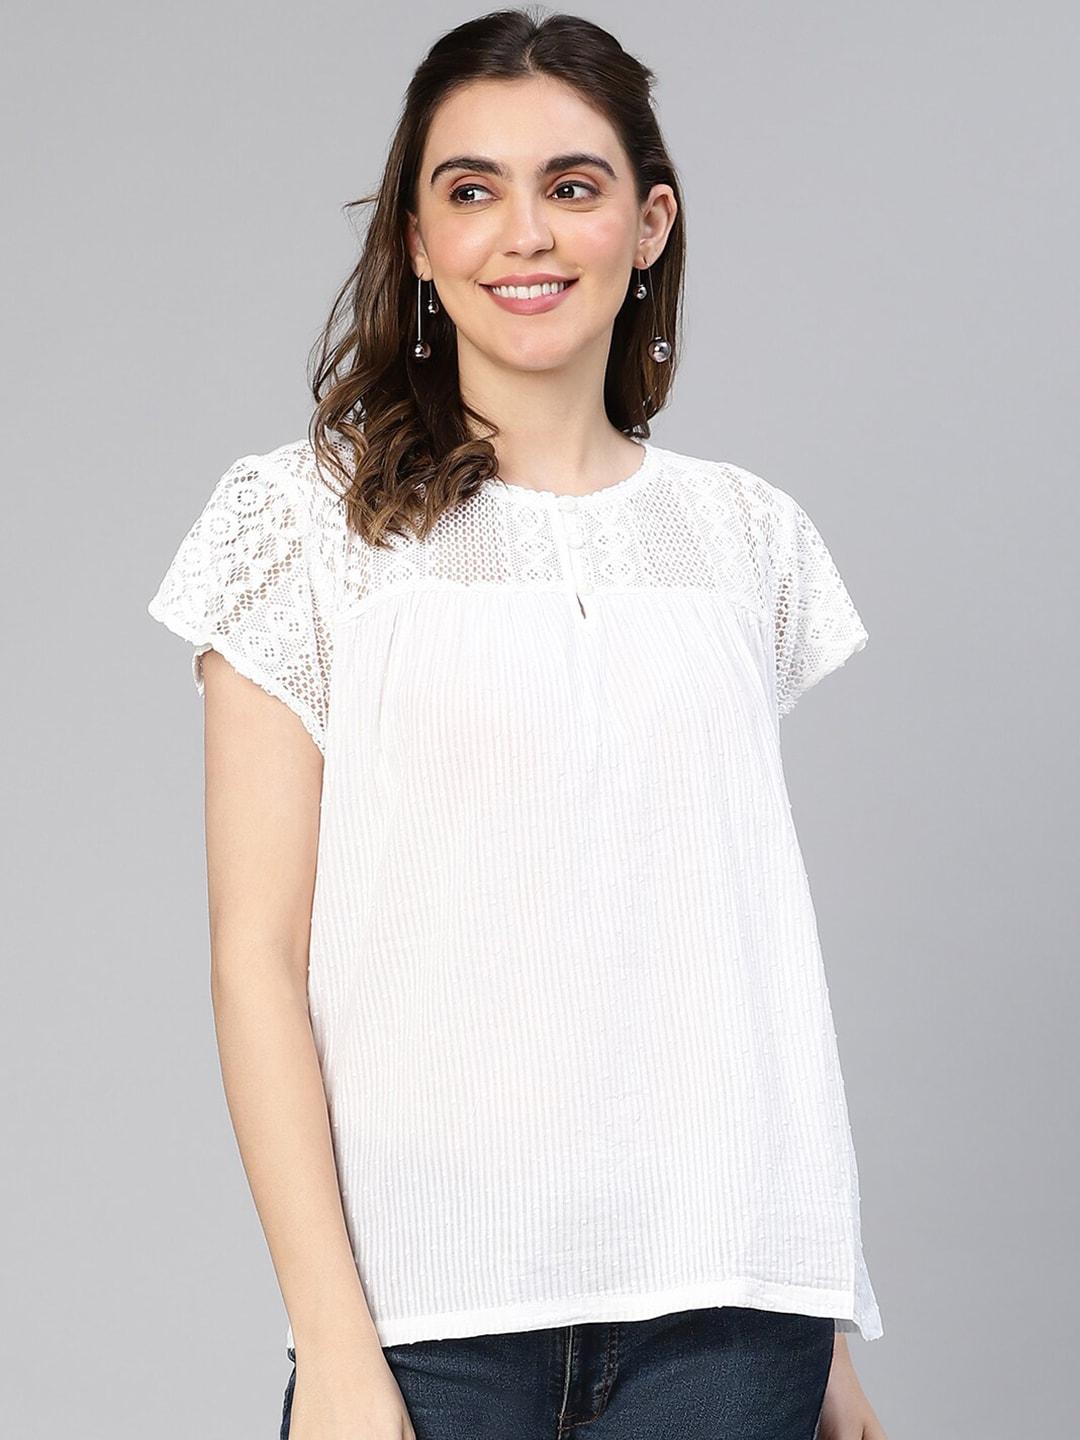 oxolloxo-self-design-short-sleeves-laced-up-pure-cotton-top